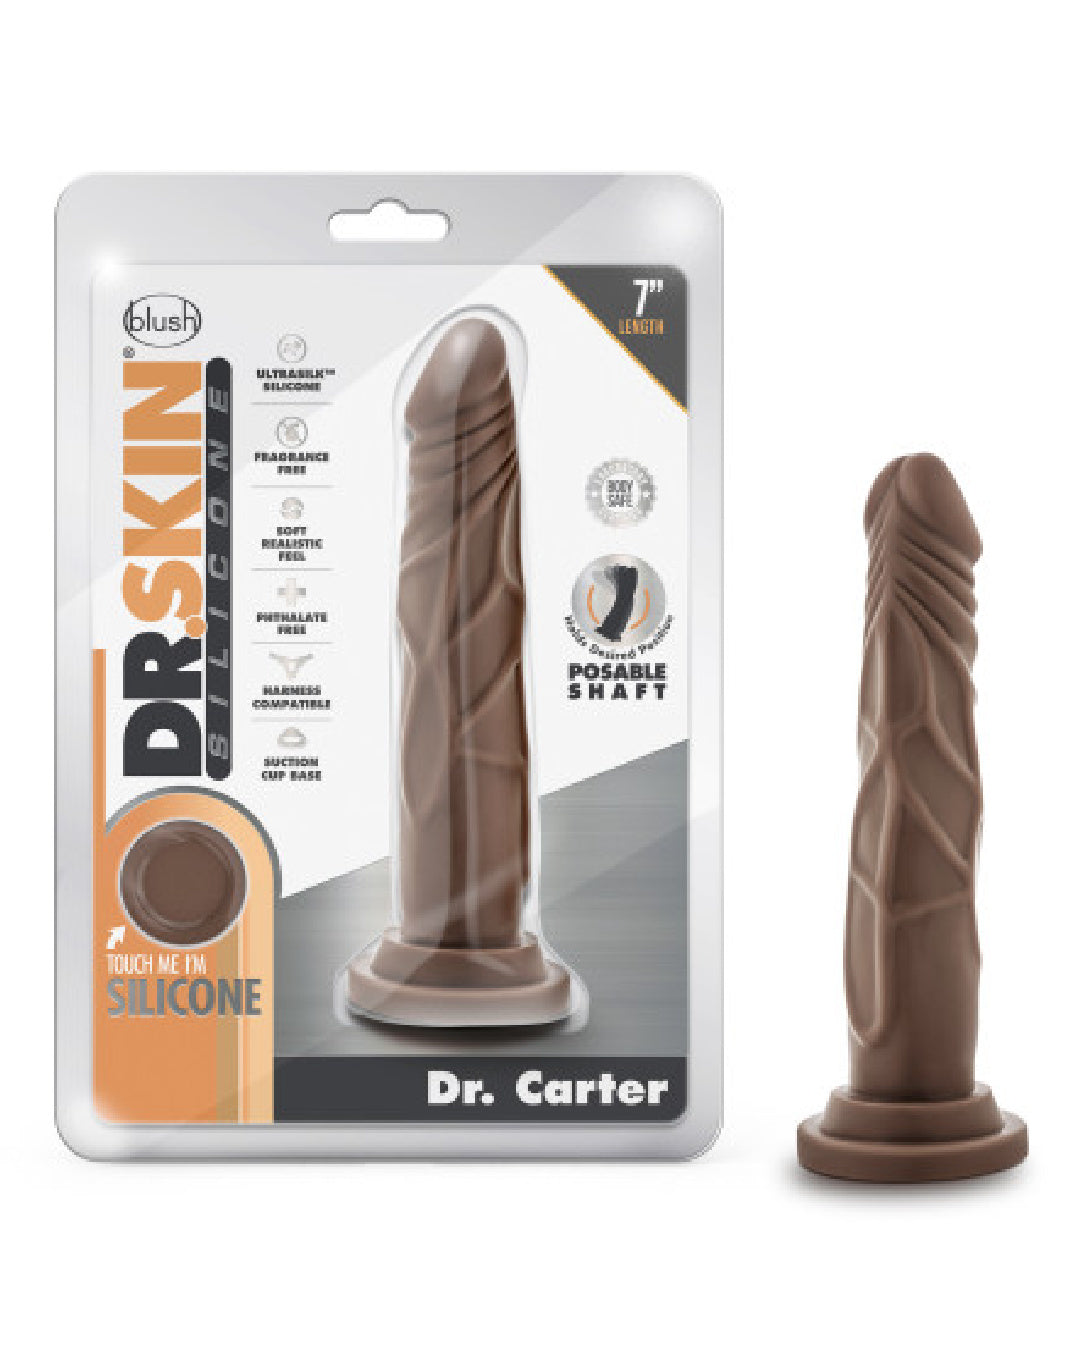 Dr Carter 7 Inch Silicone Dildo - Chocolate next to package 